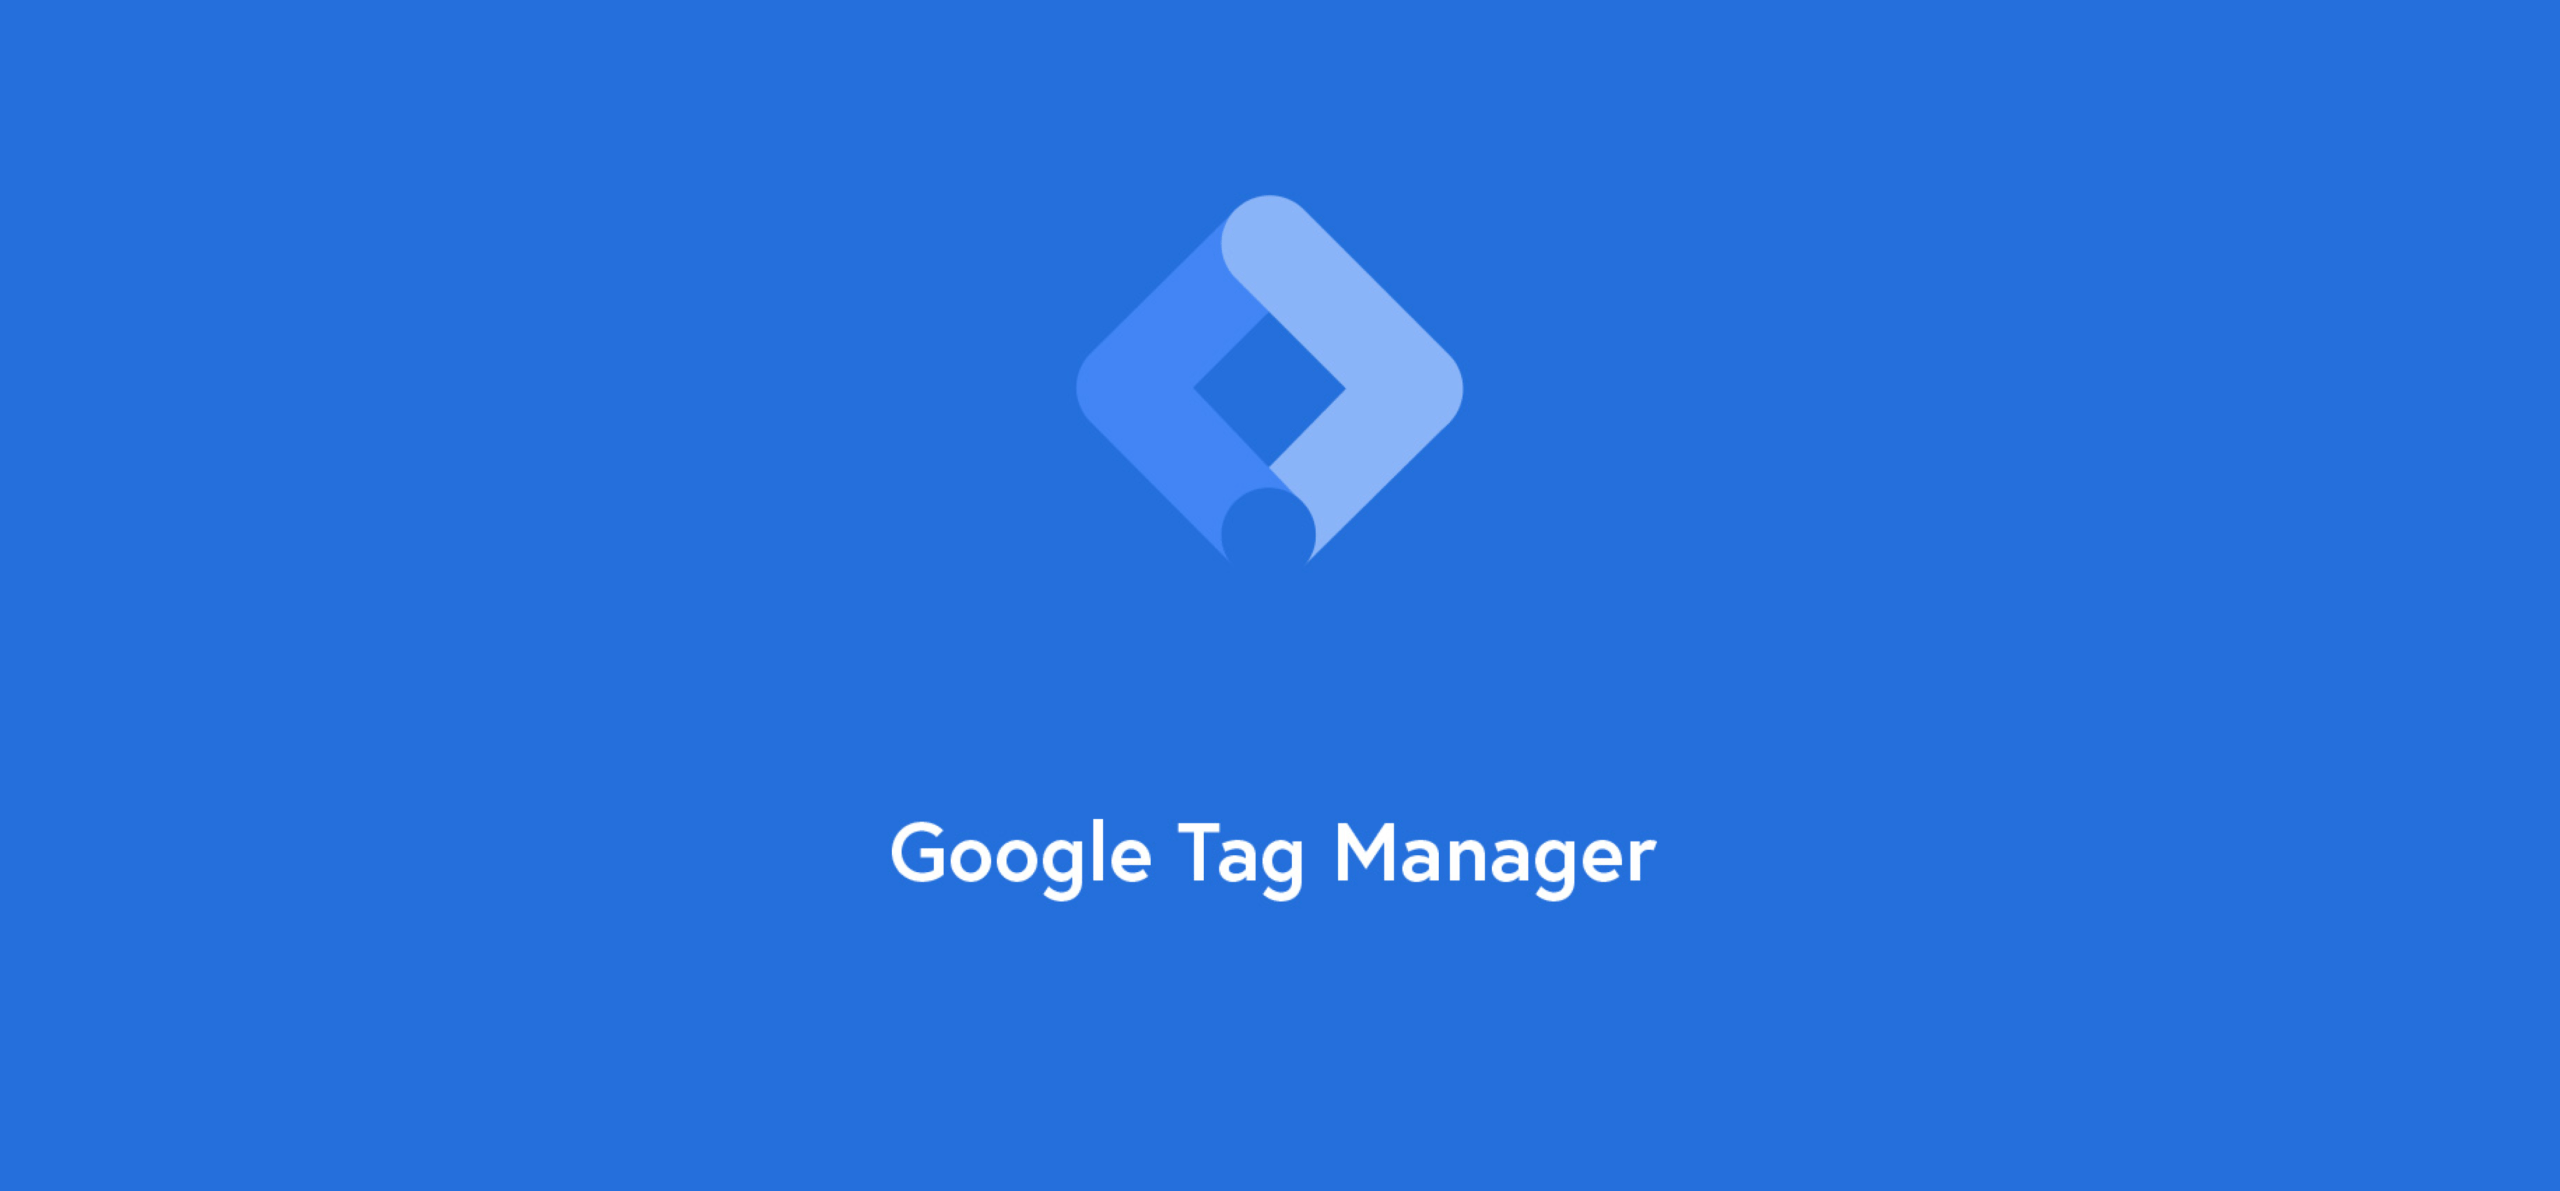 TAG MANAGER GOOGLE-ACHTERGROND